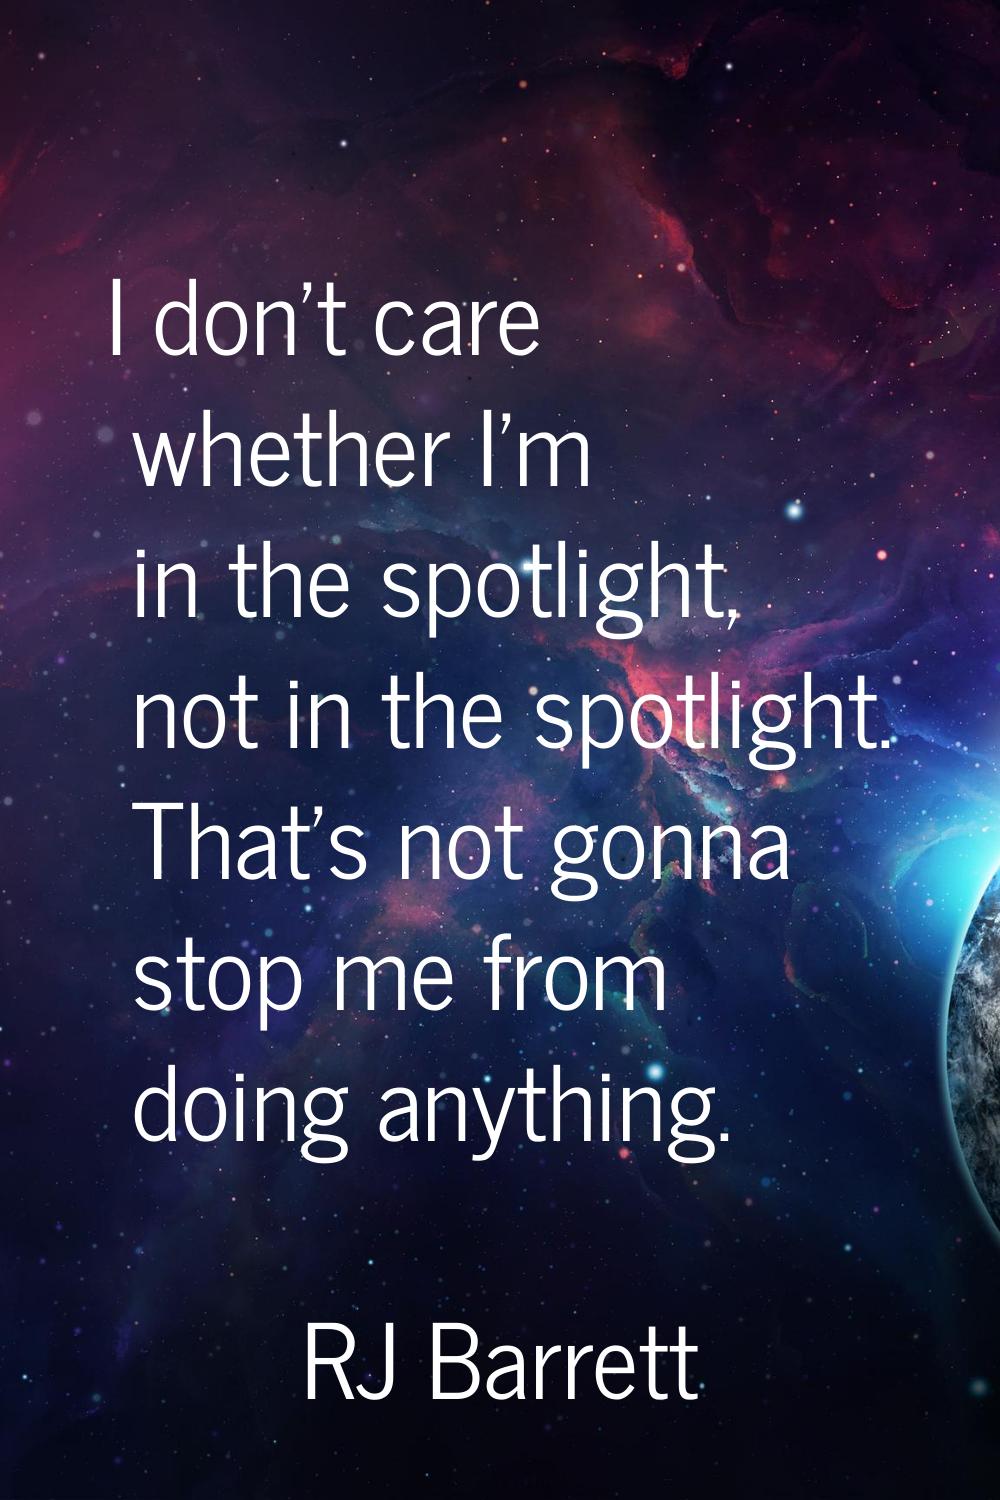 I don't care whether I'm in the spotlight, not in the spotlight. That's not gonna stop me from doin